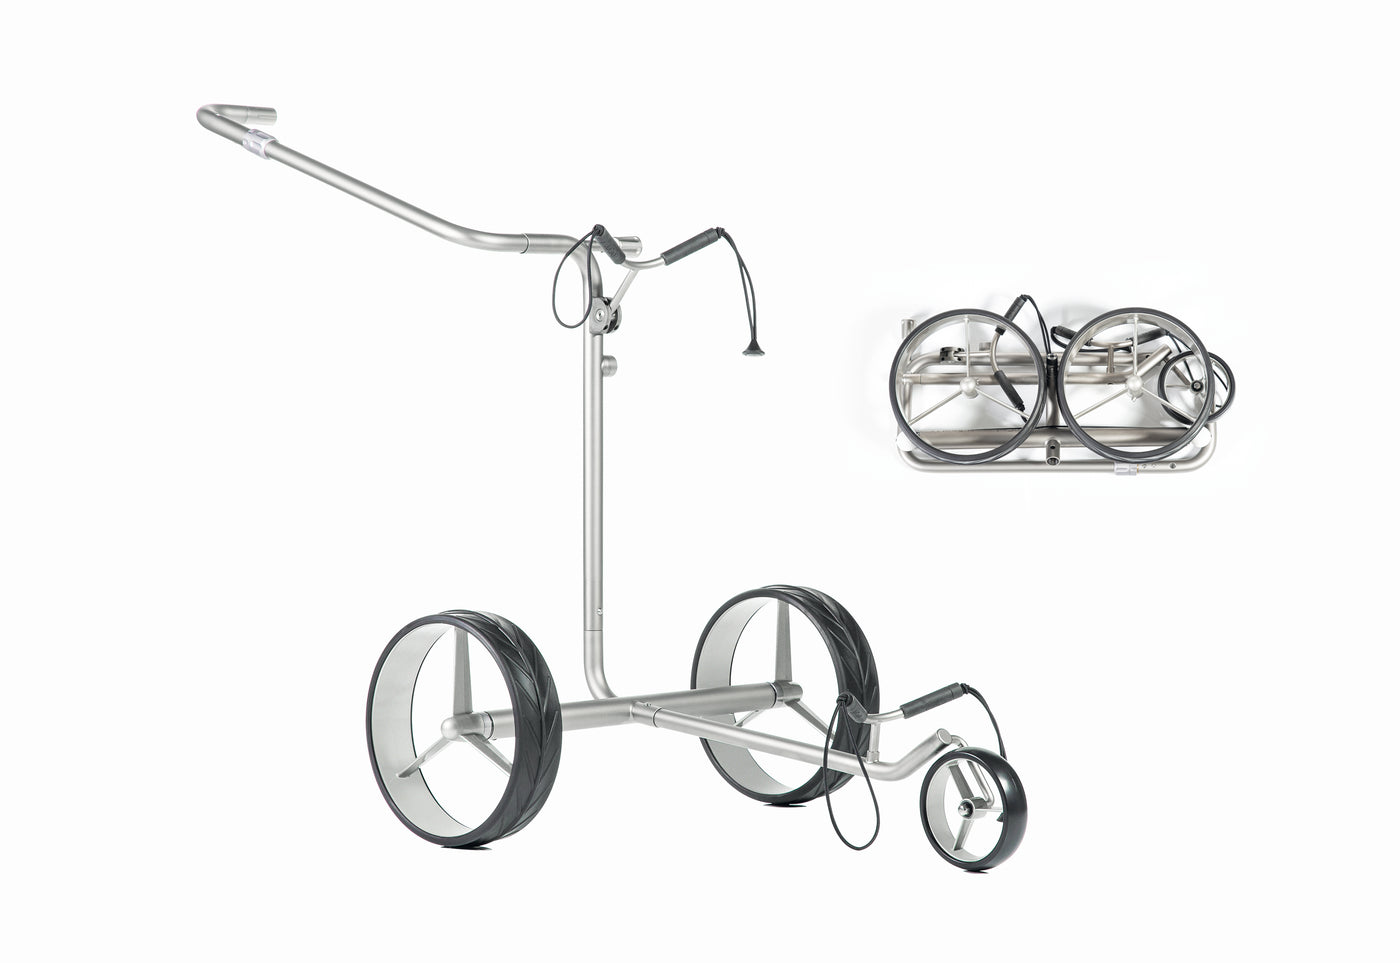 JuCad electric golf trolley drive SL Titan Travel 2.0 - our No. 1 - the best-selling electric trolley